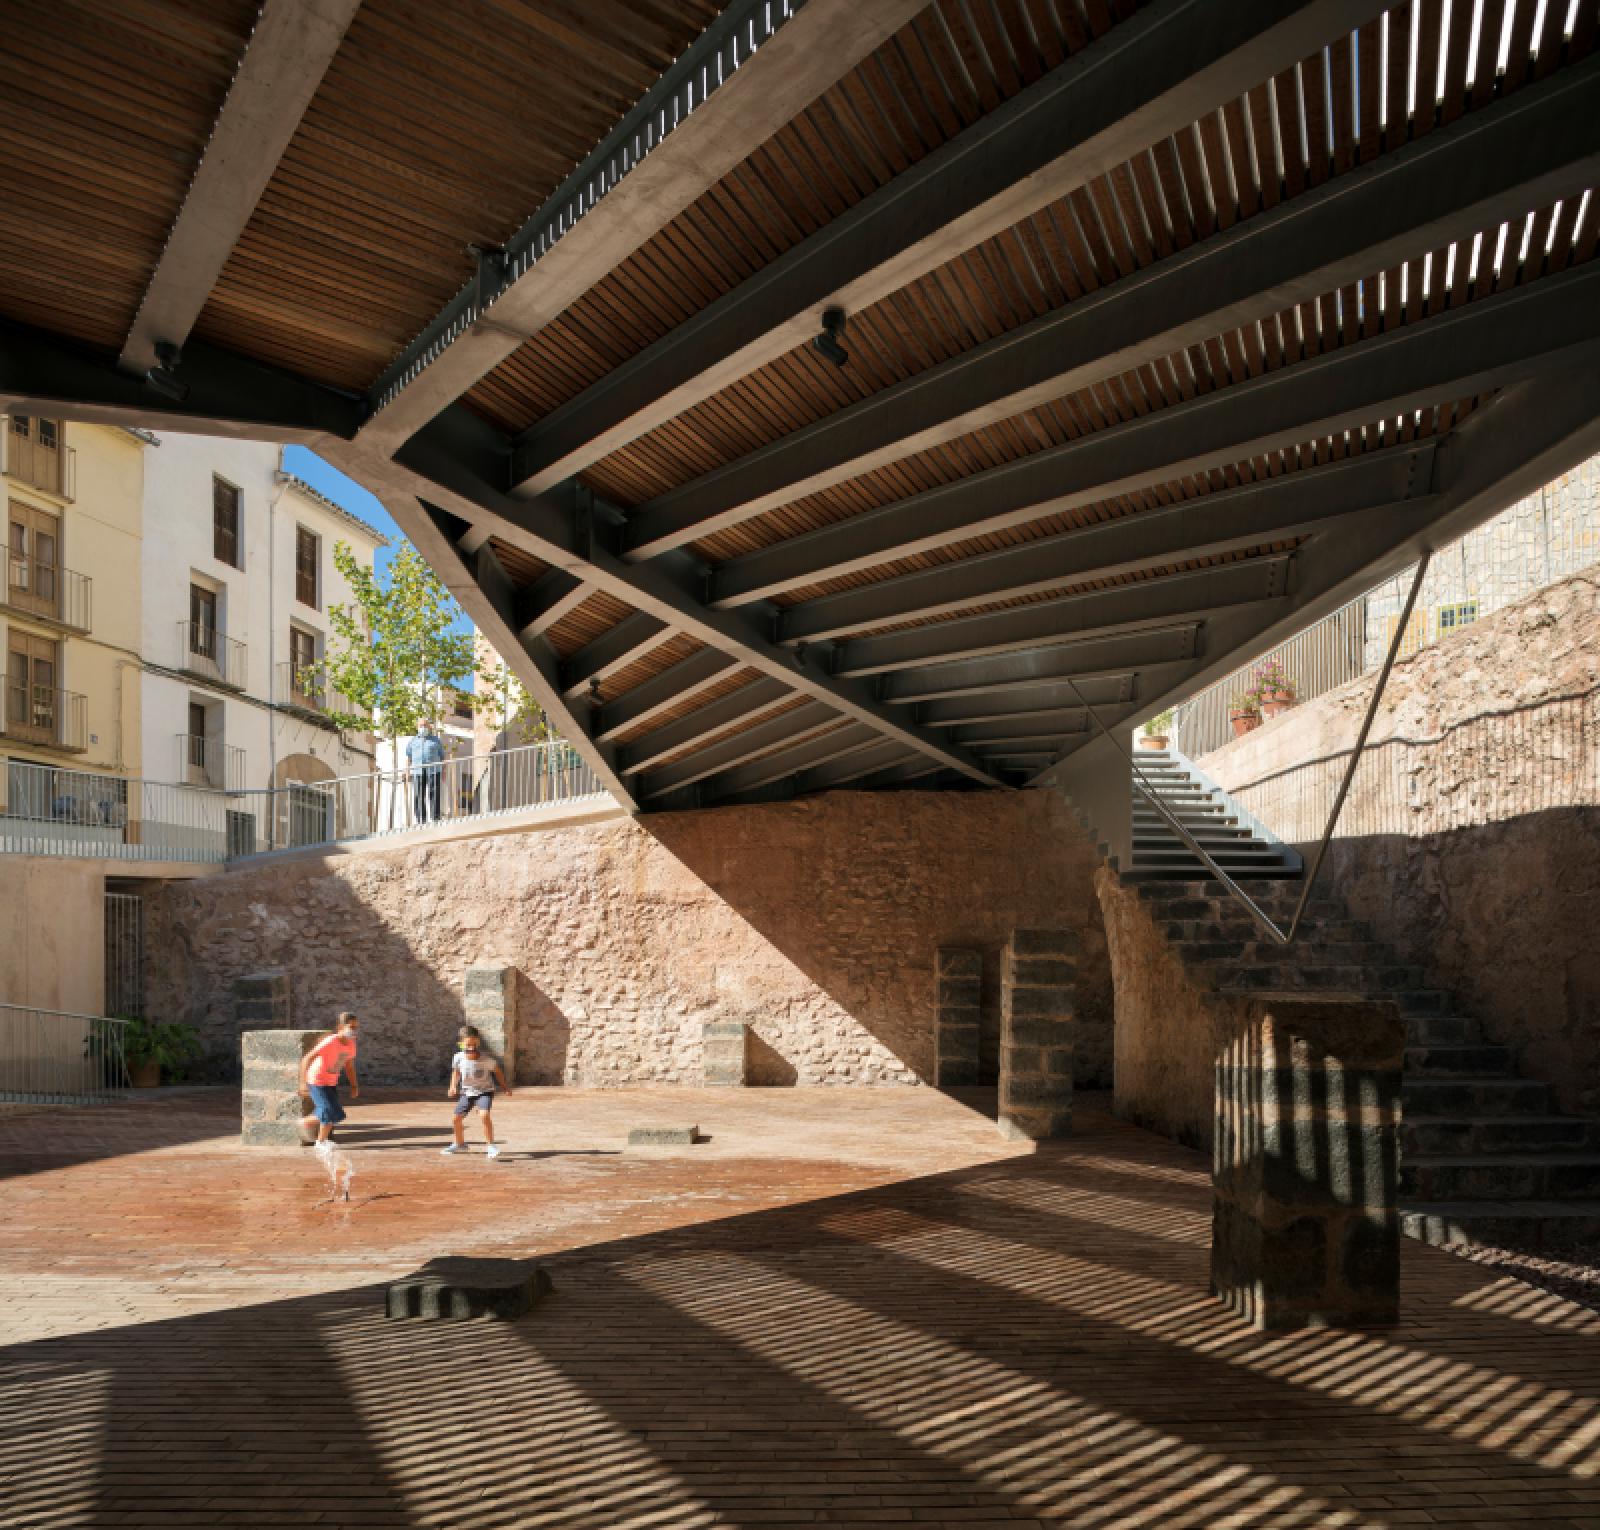 European Award for Architectural Heritage Intervention